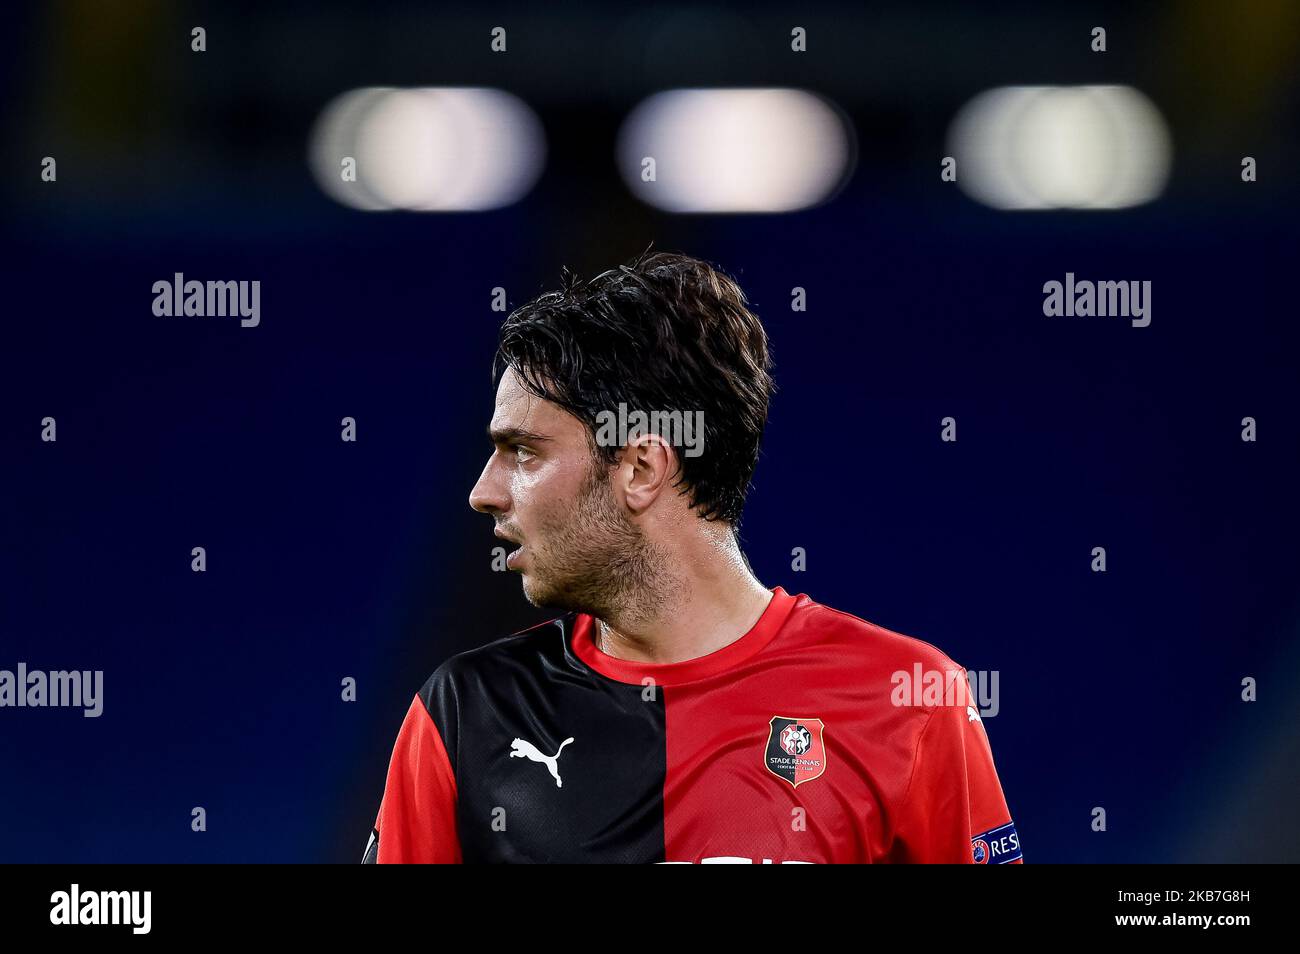 Clement Grenier of Rennes during the UEFA Europa League match between Lazio and Rennes at Stadio Olimpico, Rome, Italy on 3 October 2019. (Photo by Giuseppe Maffia/NurPhoto) Stock Photo